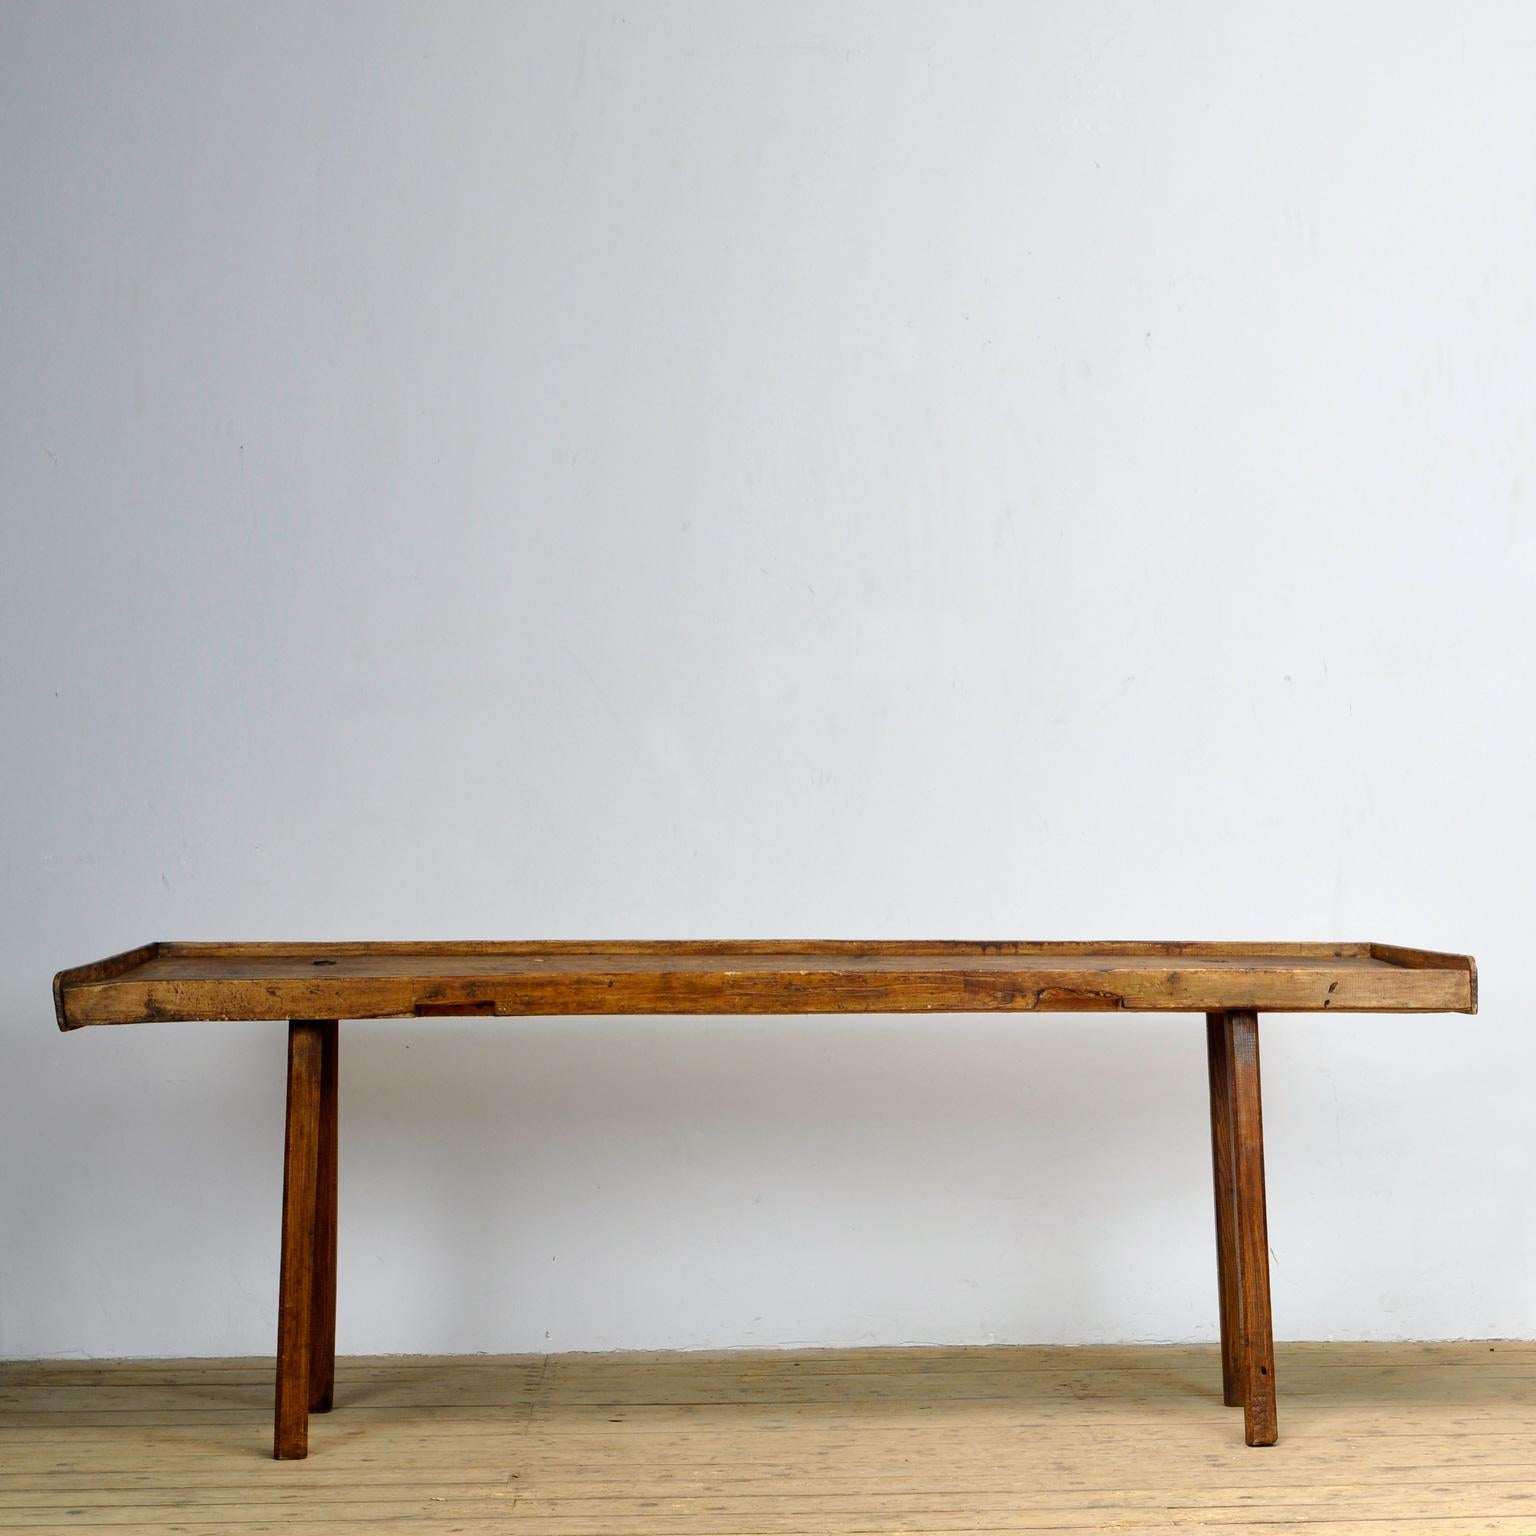 Large oak farm preparation table. Made around 1920. The table has a raised edge at the back and sides. The top widens. The top is 230 cm at the back and 249 cm at the front. The table is sturdy and free from woodworm.